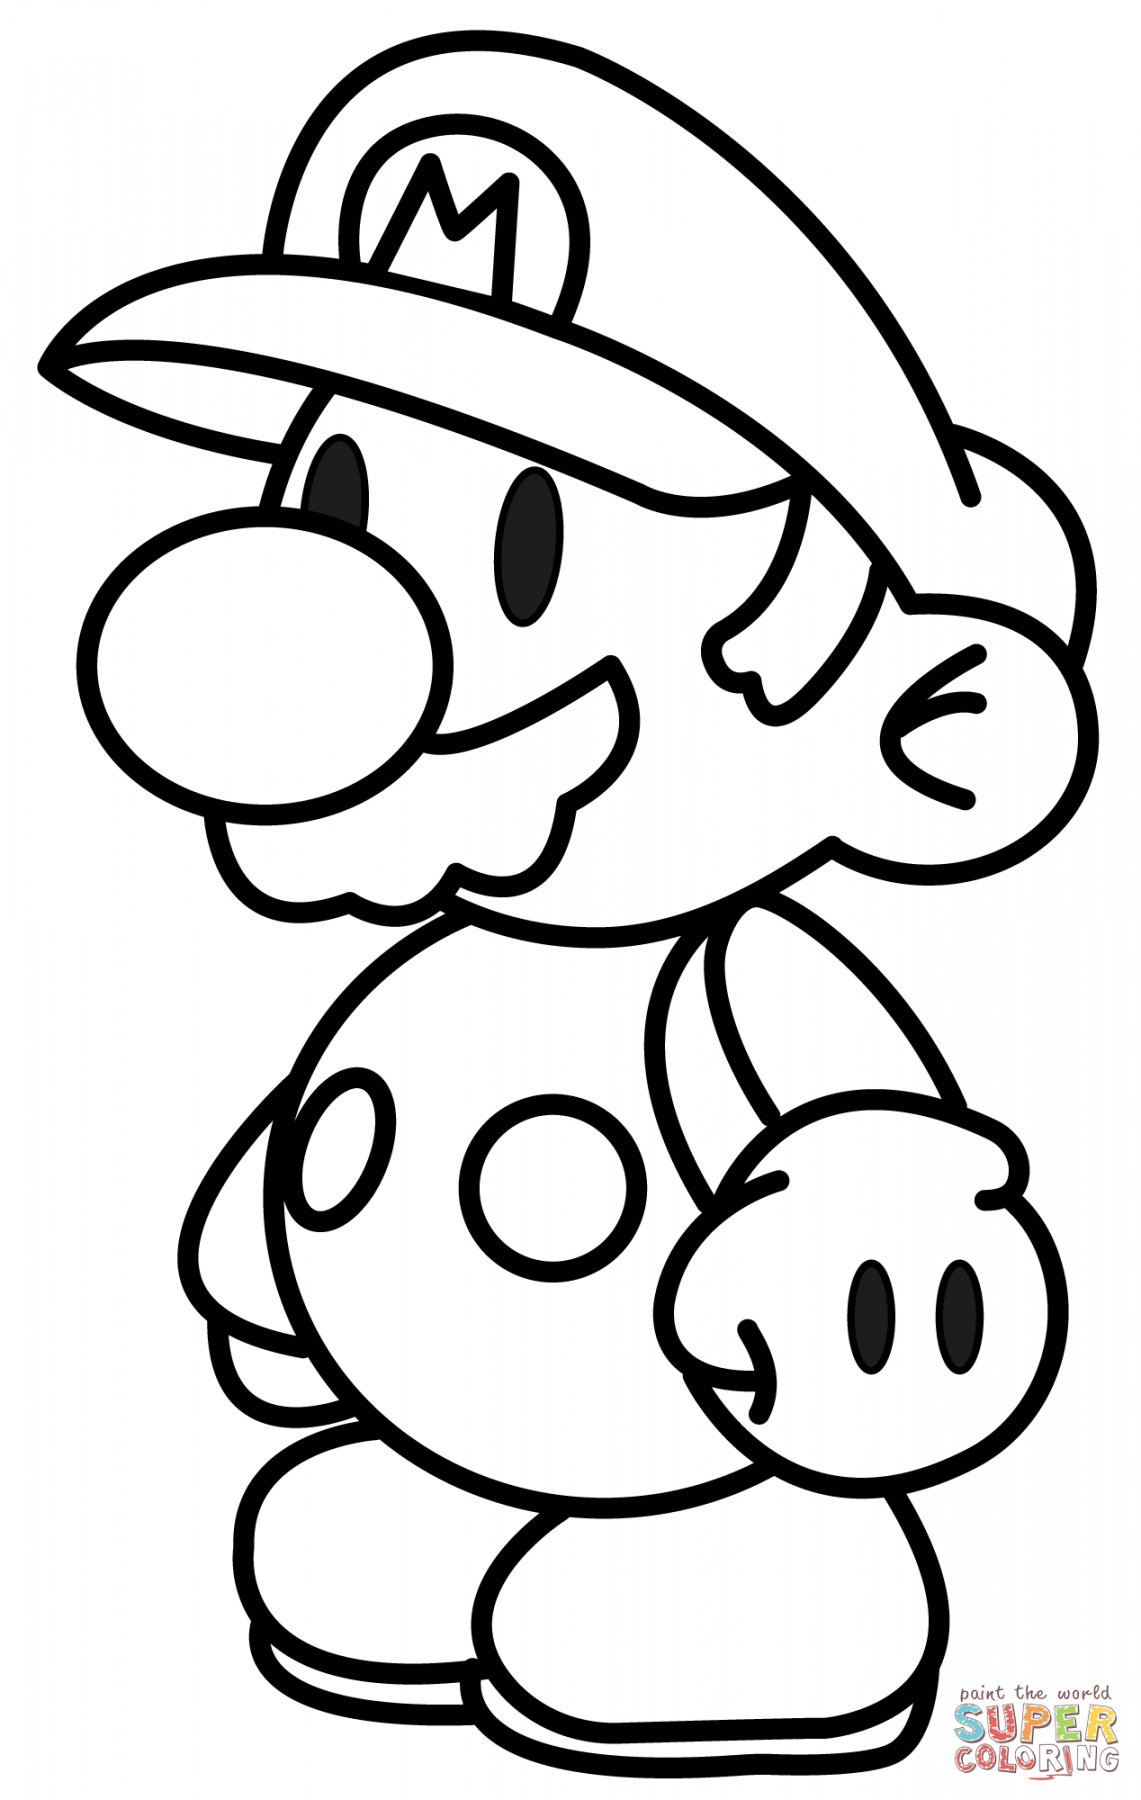 Free Printable Coloring Pages Mario - Printable - Chibi Mario coloring page  Free Printable Coloring Pages